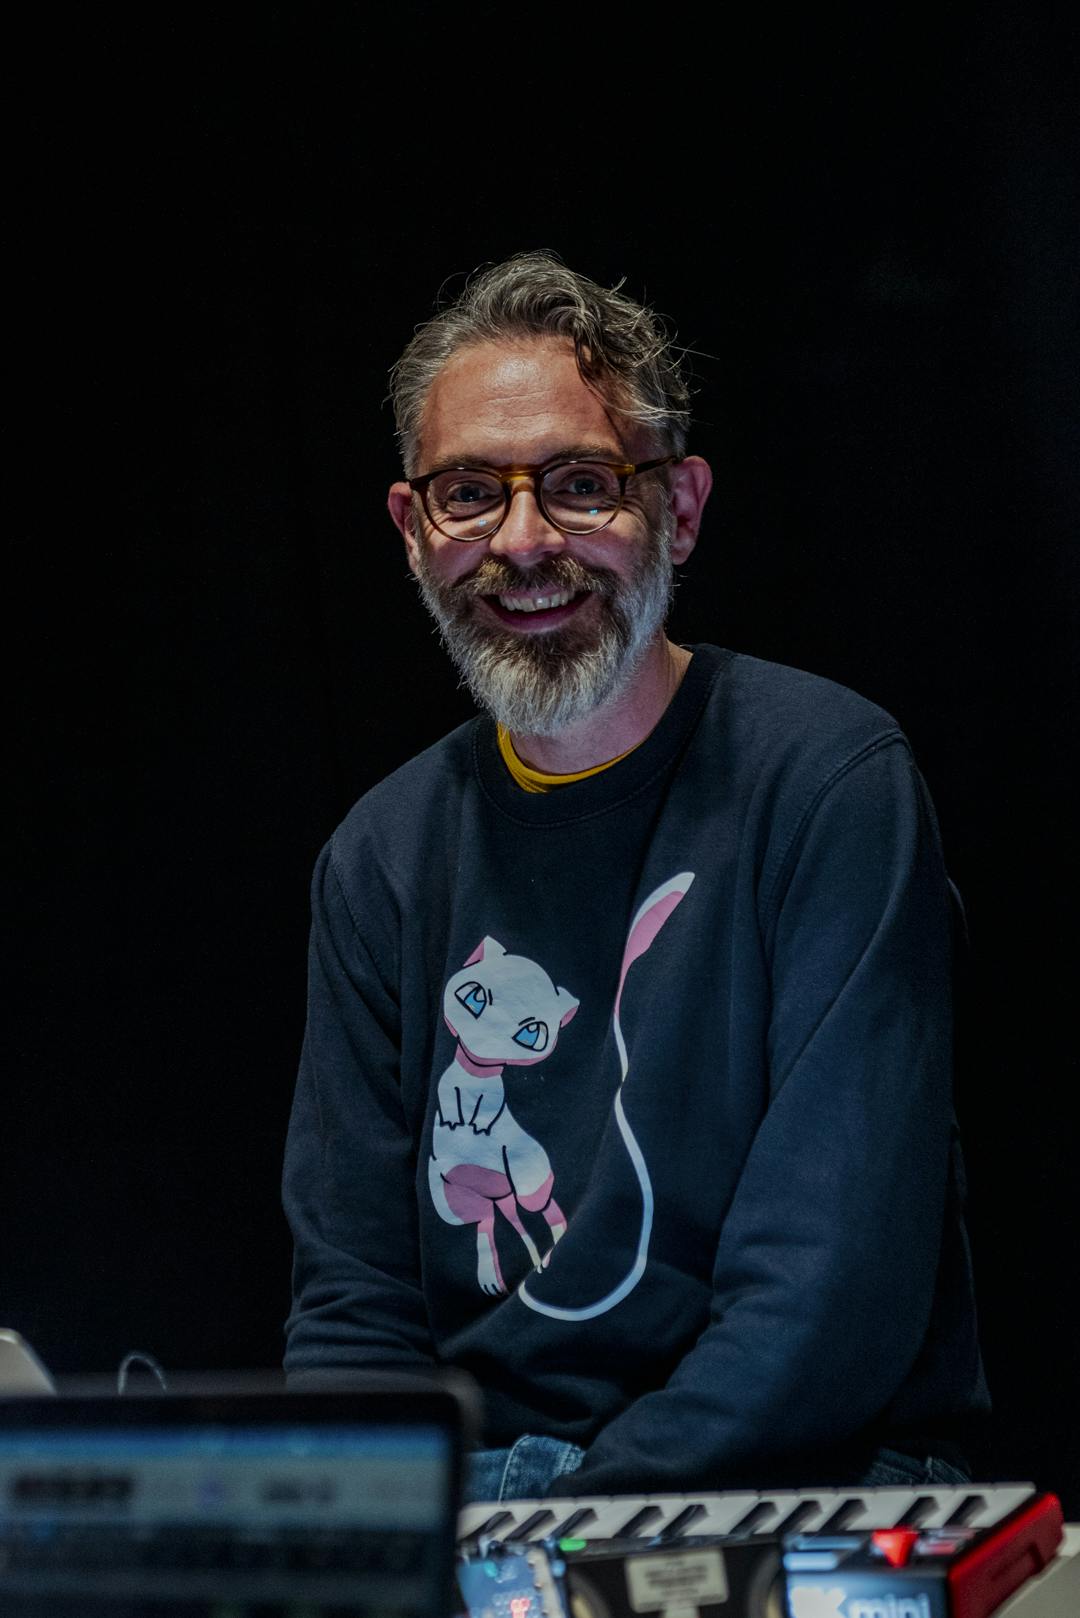 Neil Rose, Sound Arts Lecturer, wears a long sleeve black sweatshirt and glasses as he smiles whilst working on the sound mixing desks on a table in front of him